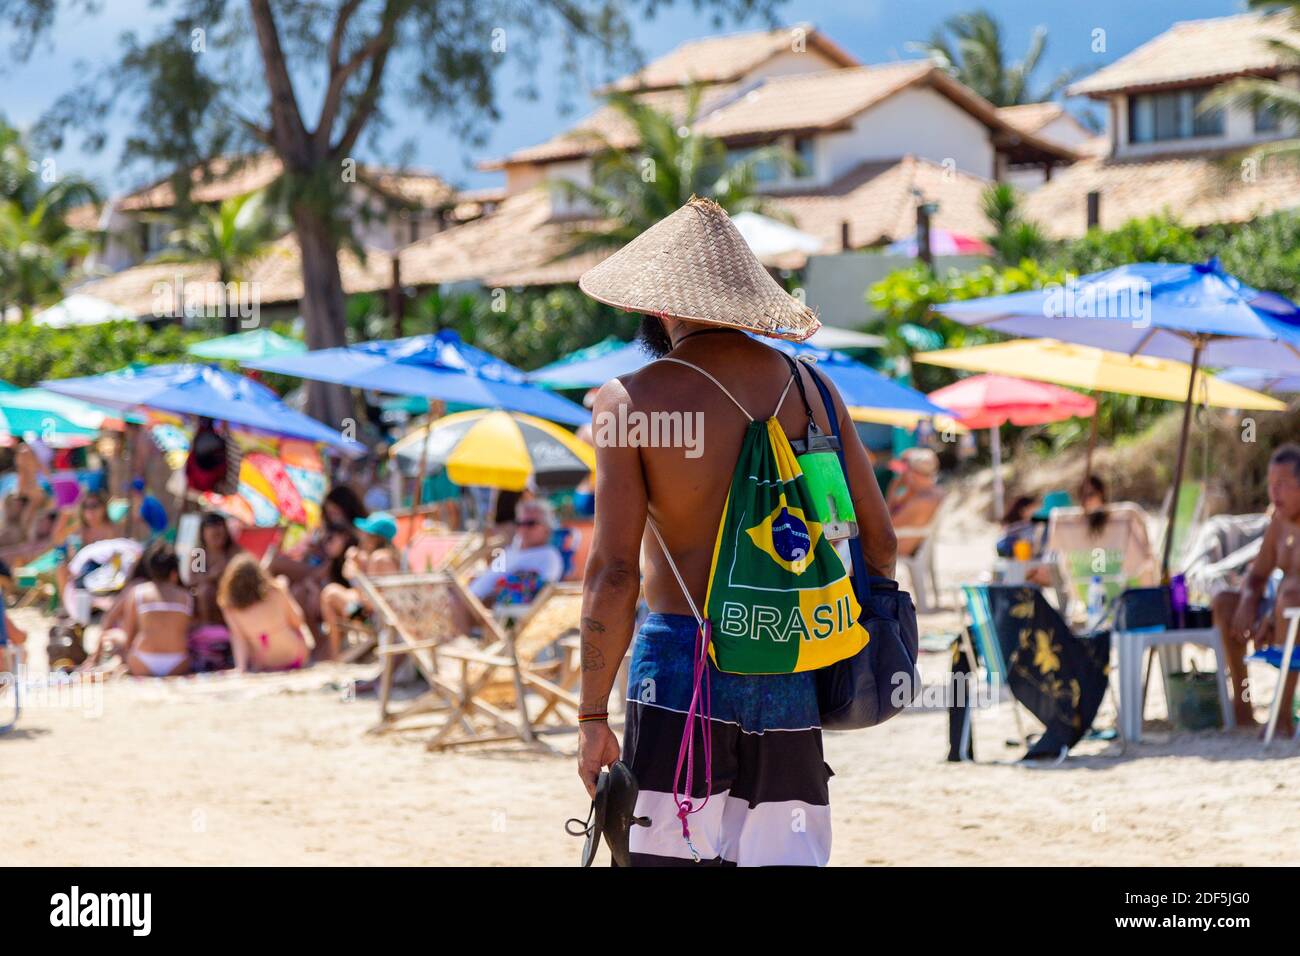 Buzios, Rio de Janeiro, Brazil – December 22, 2019: Brazilian man wearing a traditional backpack with the colors of Brazil. Stock Photo